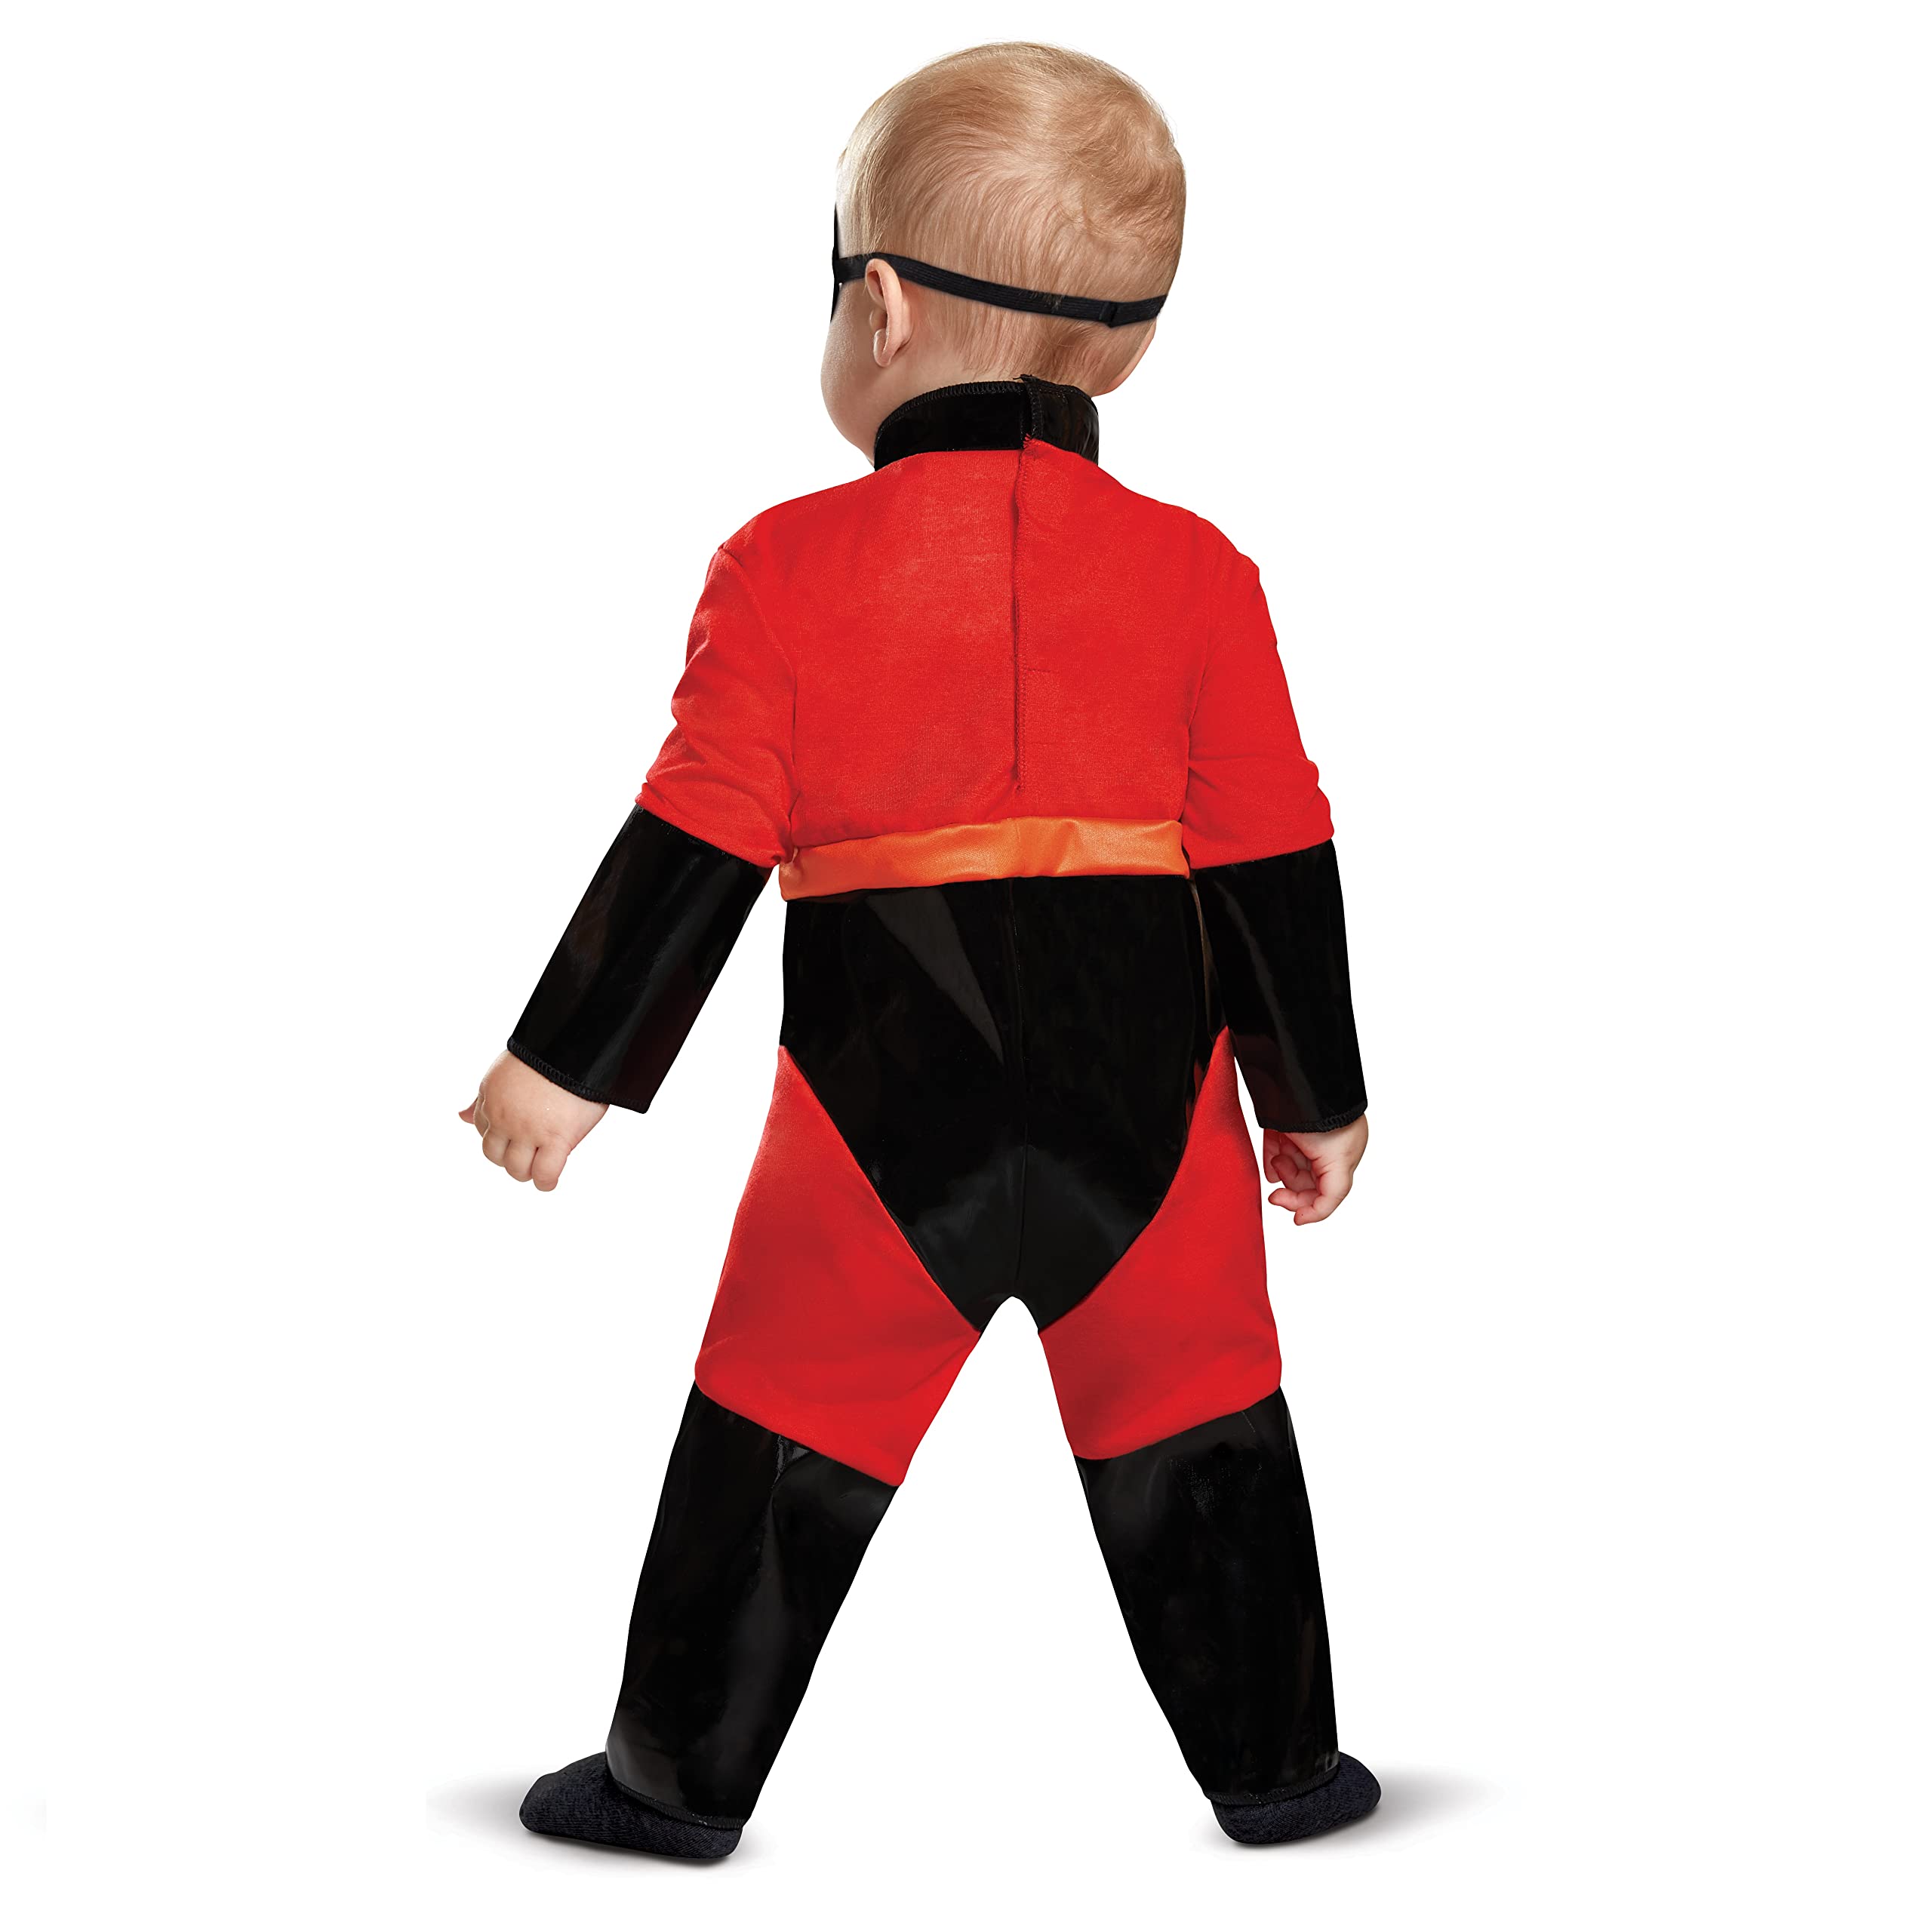 Disguise Kid's Incredibles Infant Classic Costume